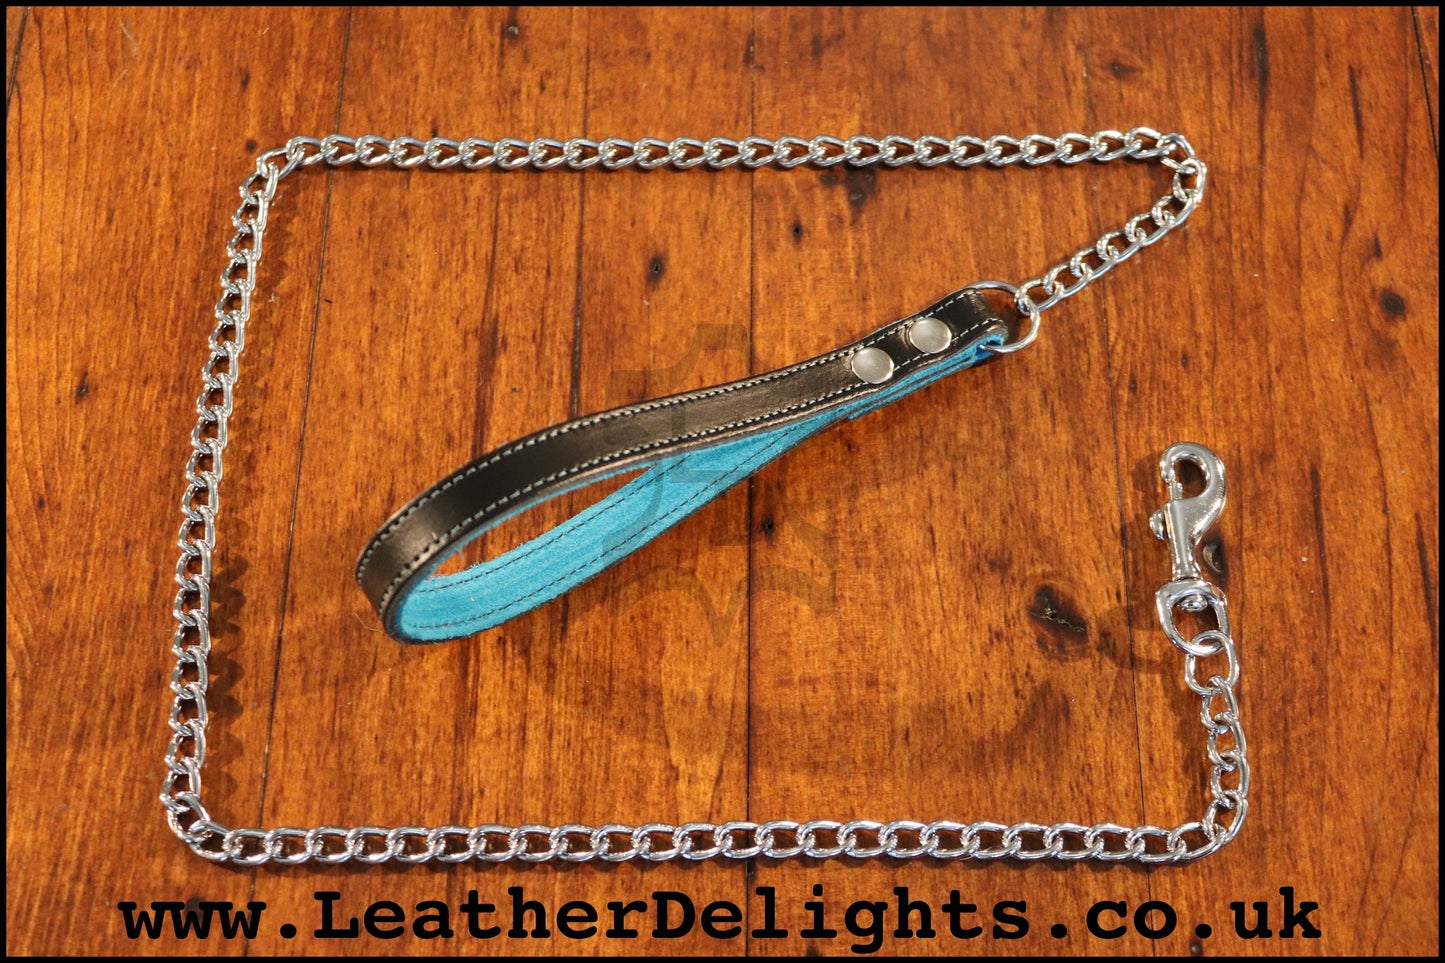 Chain Lead with Leather Handle - Leather Delights